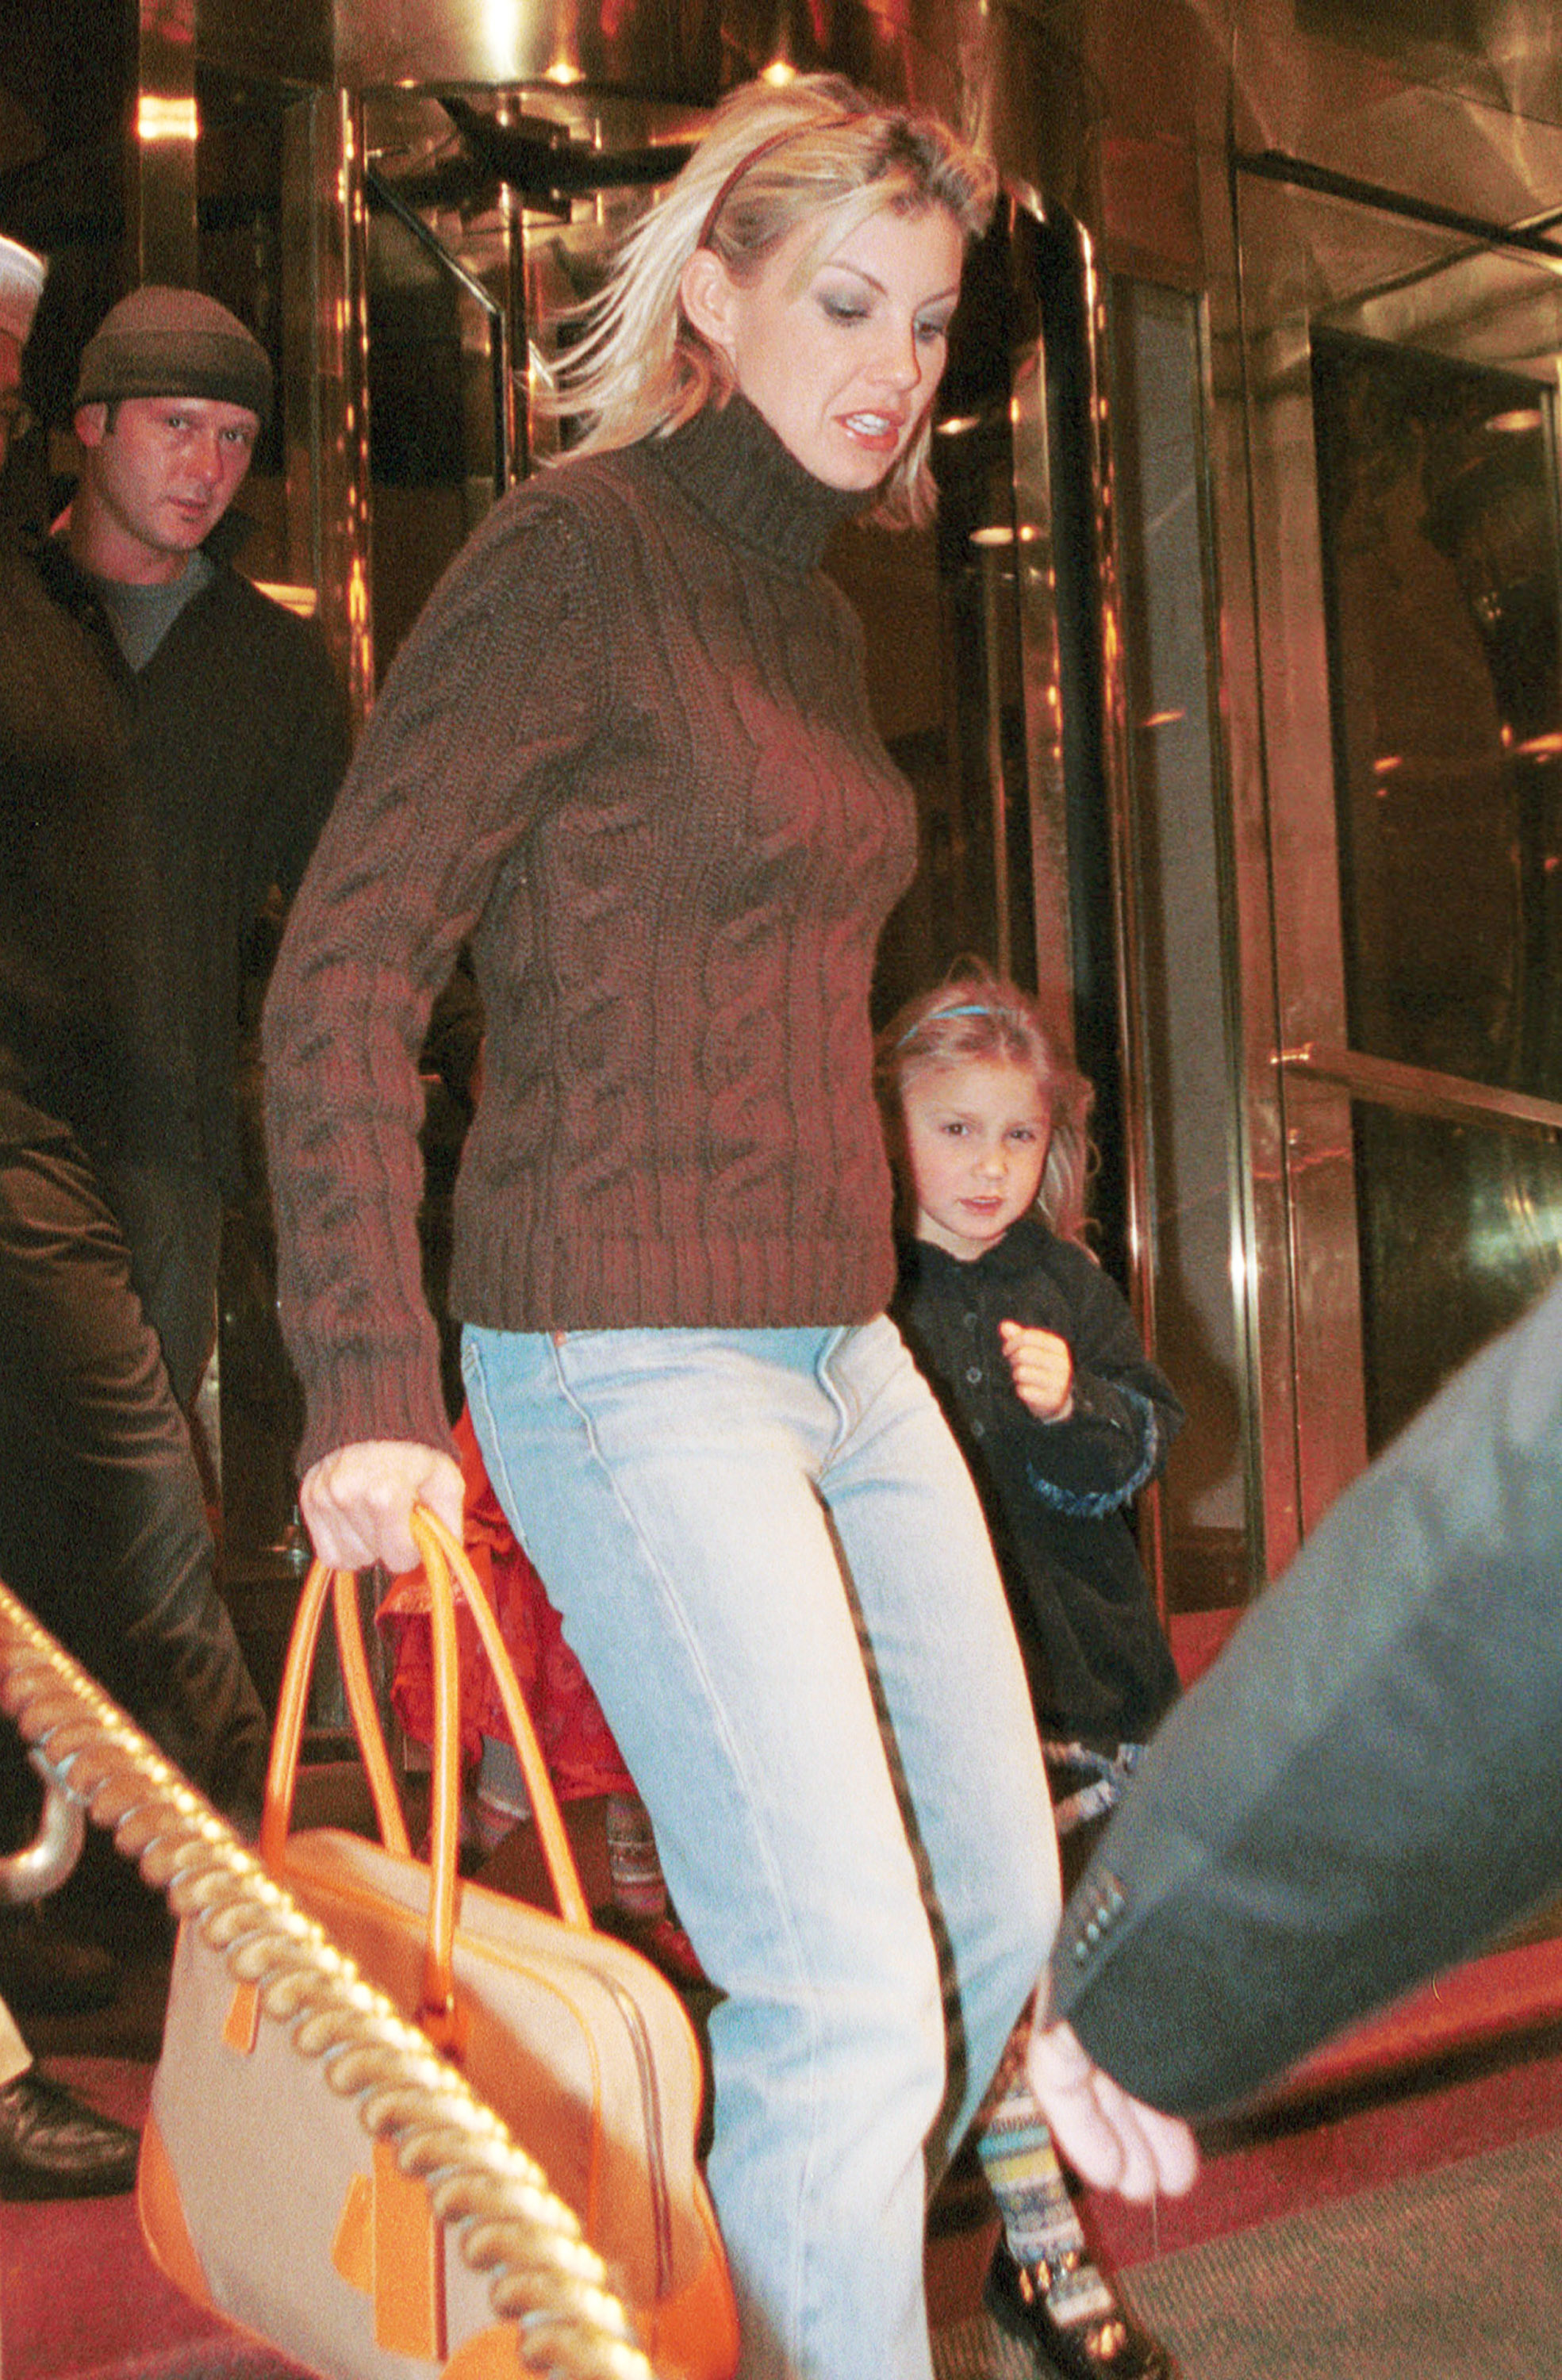 Faith Hill, Tim McGraw and Gracie Katherine in New York City on March 30, 2001 | Source: Getty Images